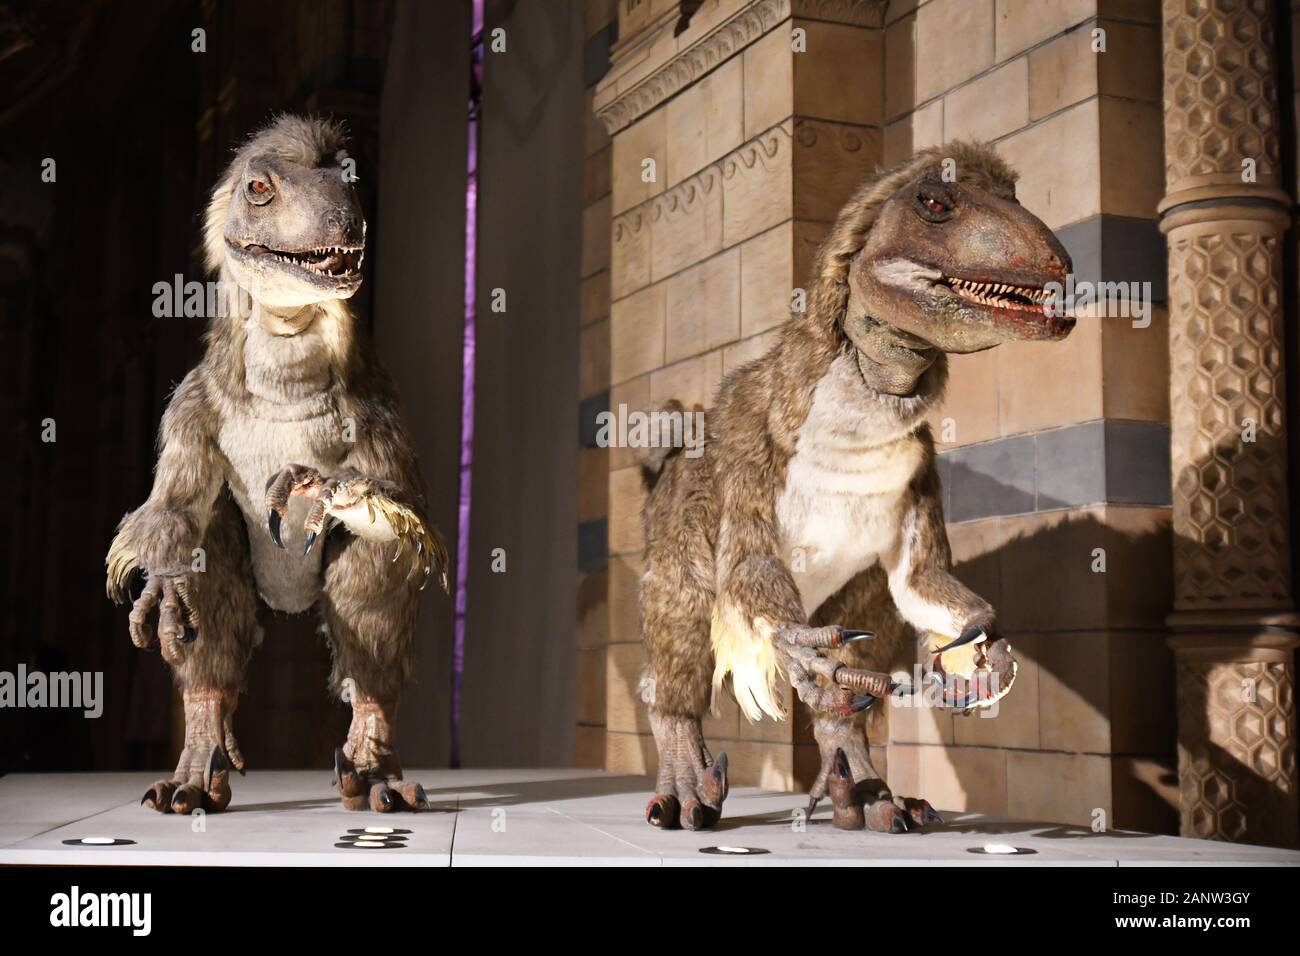 Moving animatronic dinosaurs in the Dinosaur Gallery at the Natural History Museum, London, England, UK Stock Photo